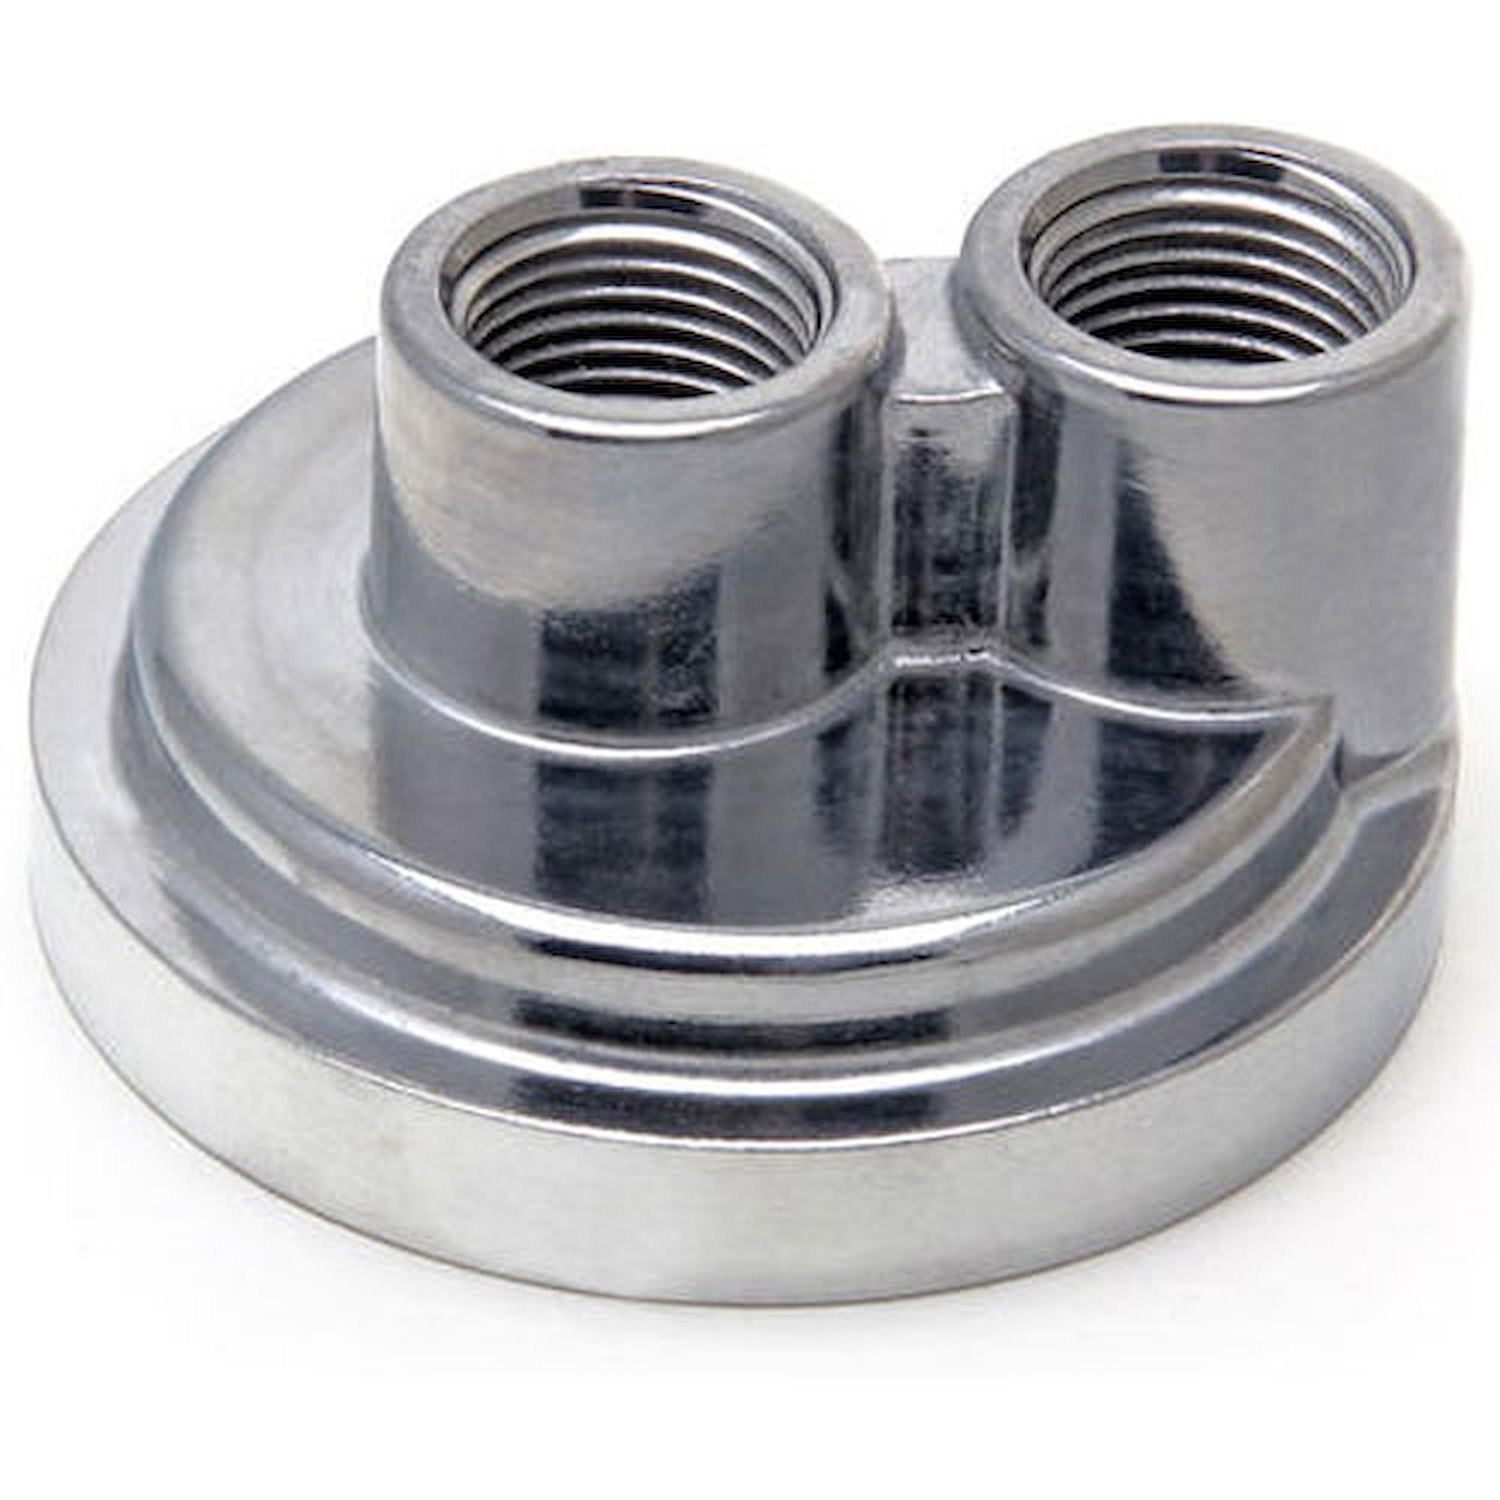 Spin-On Oil Filter Bypass Adapter Ford Modular V8 4.6L/5.4L